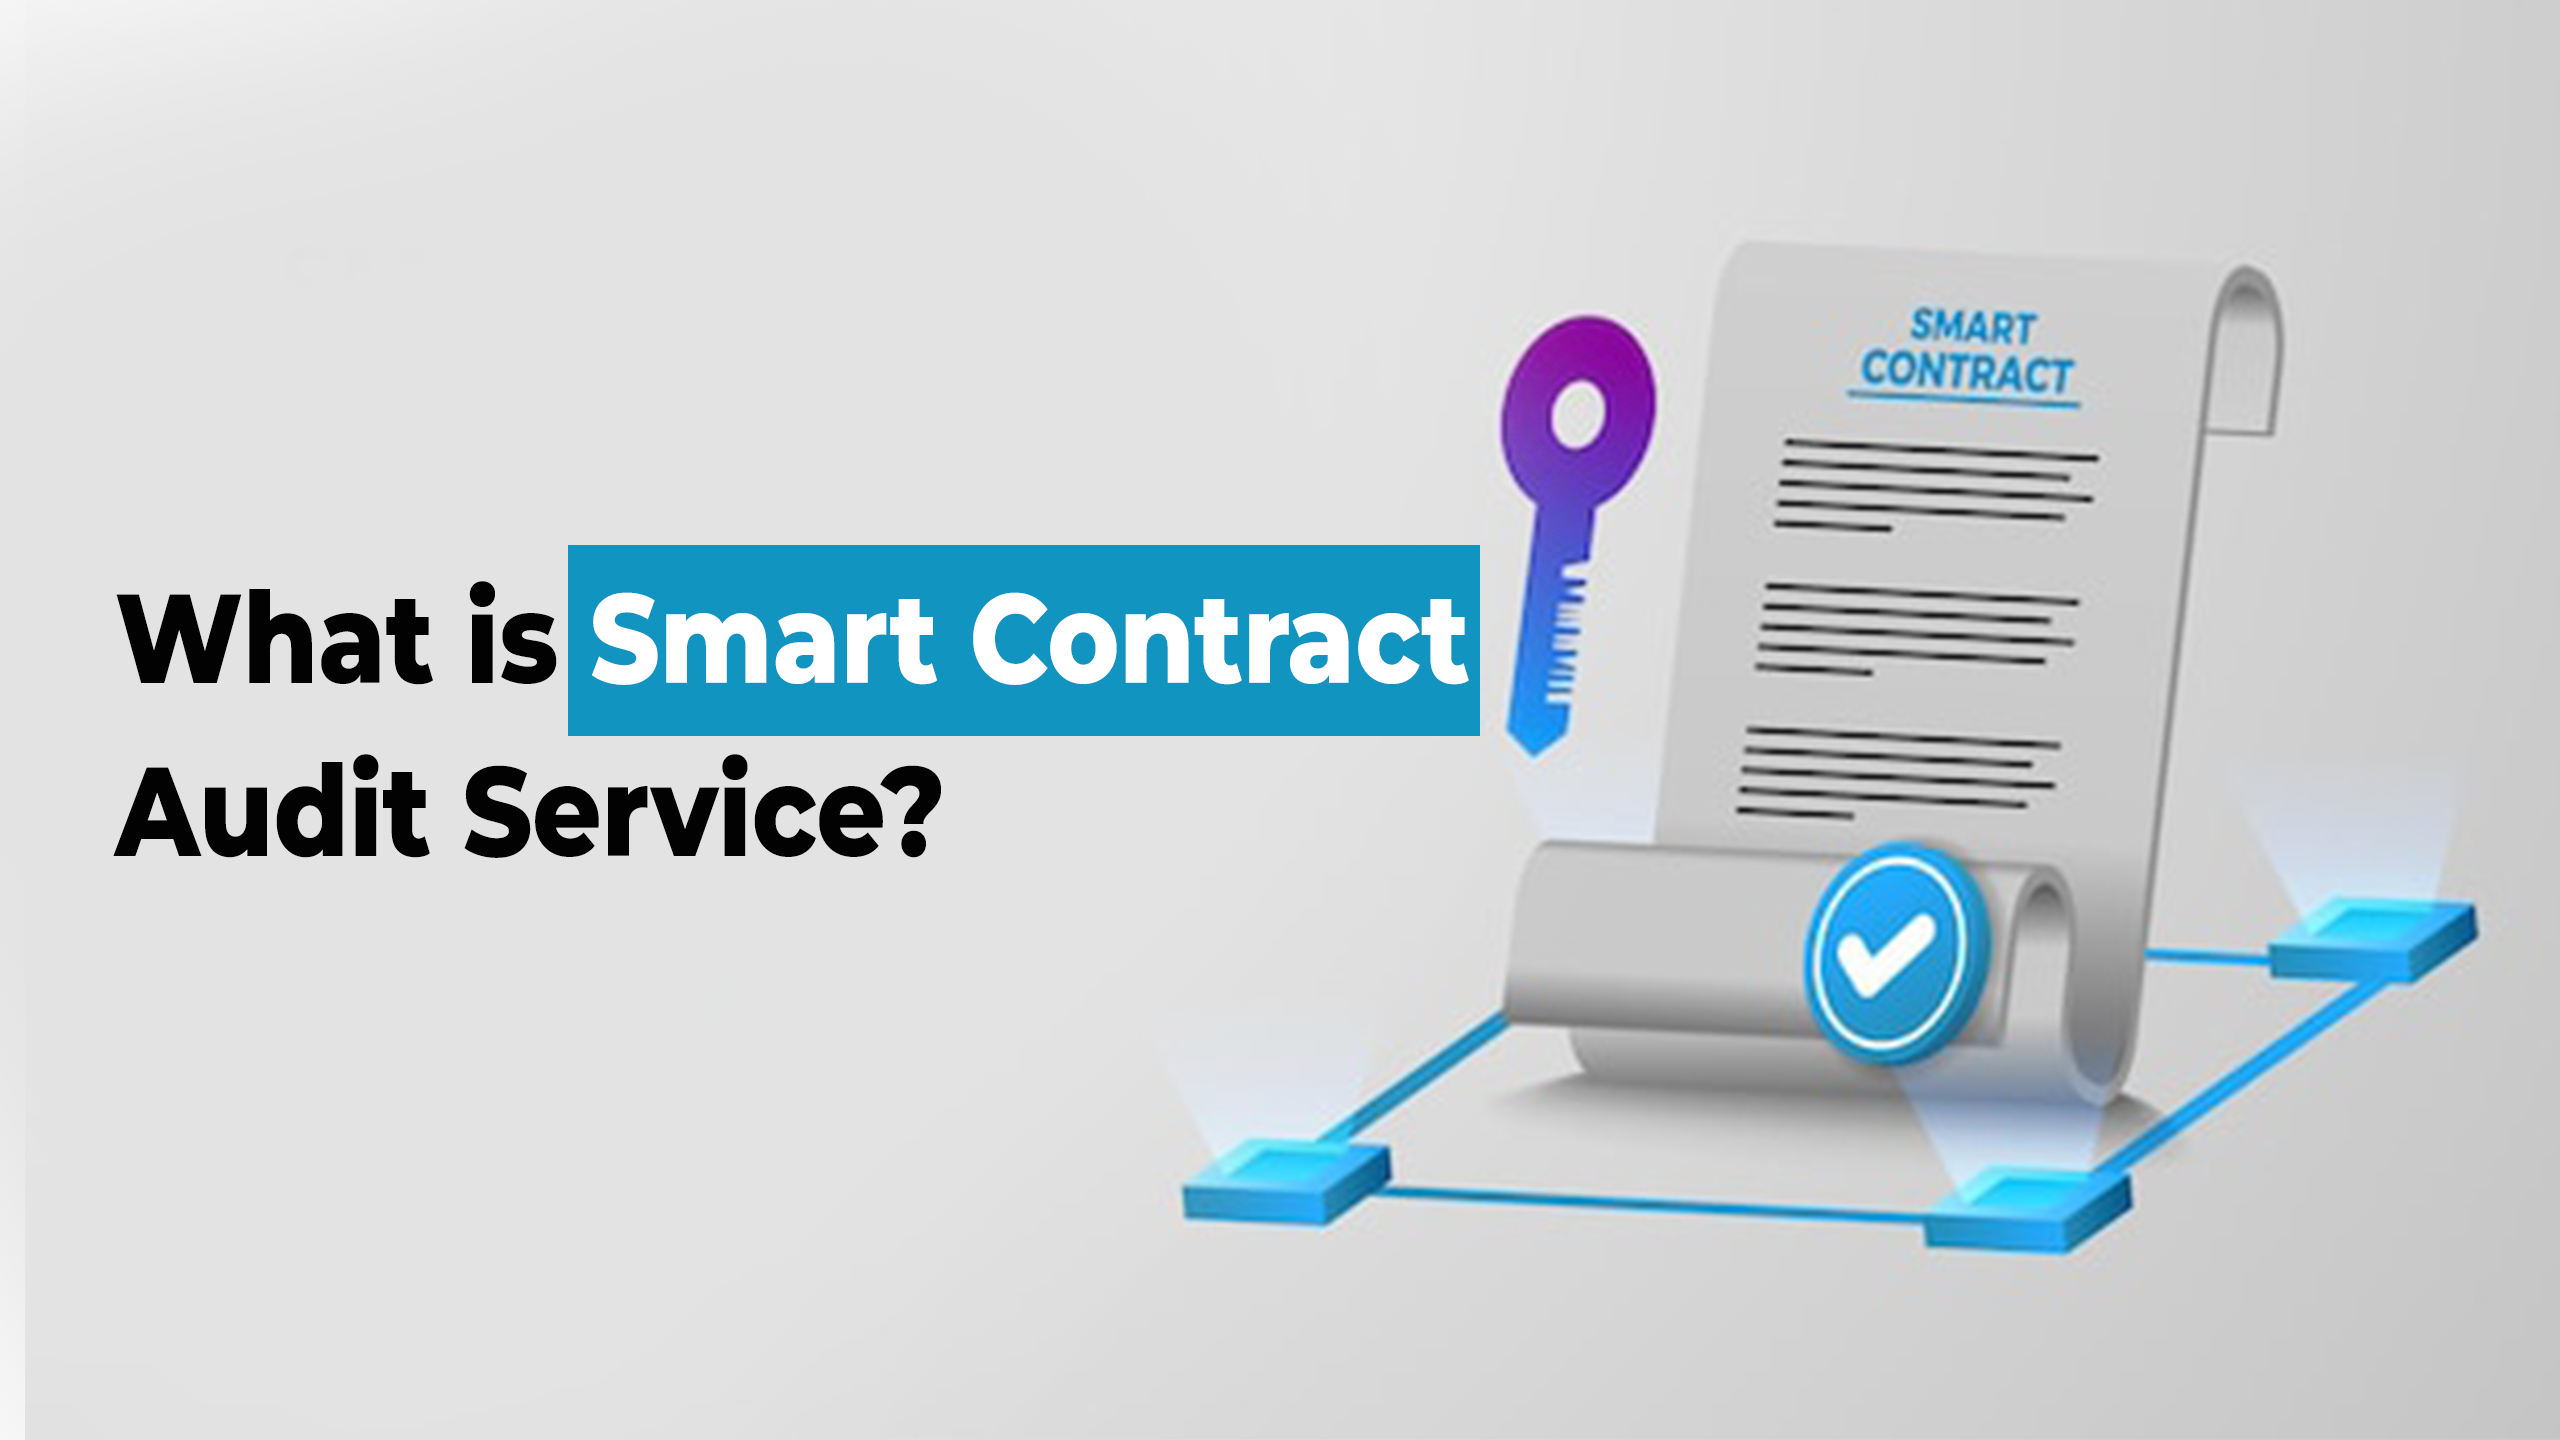 What is Smart Contract Audit Service?